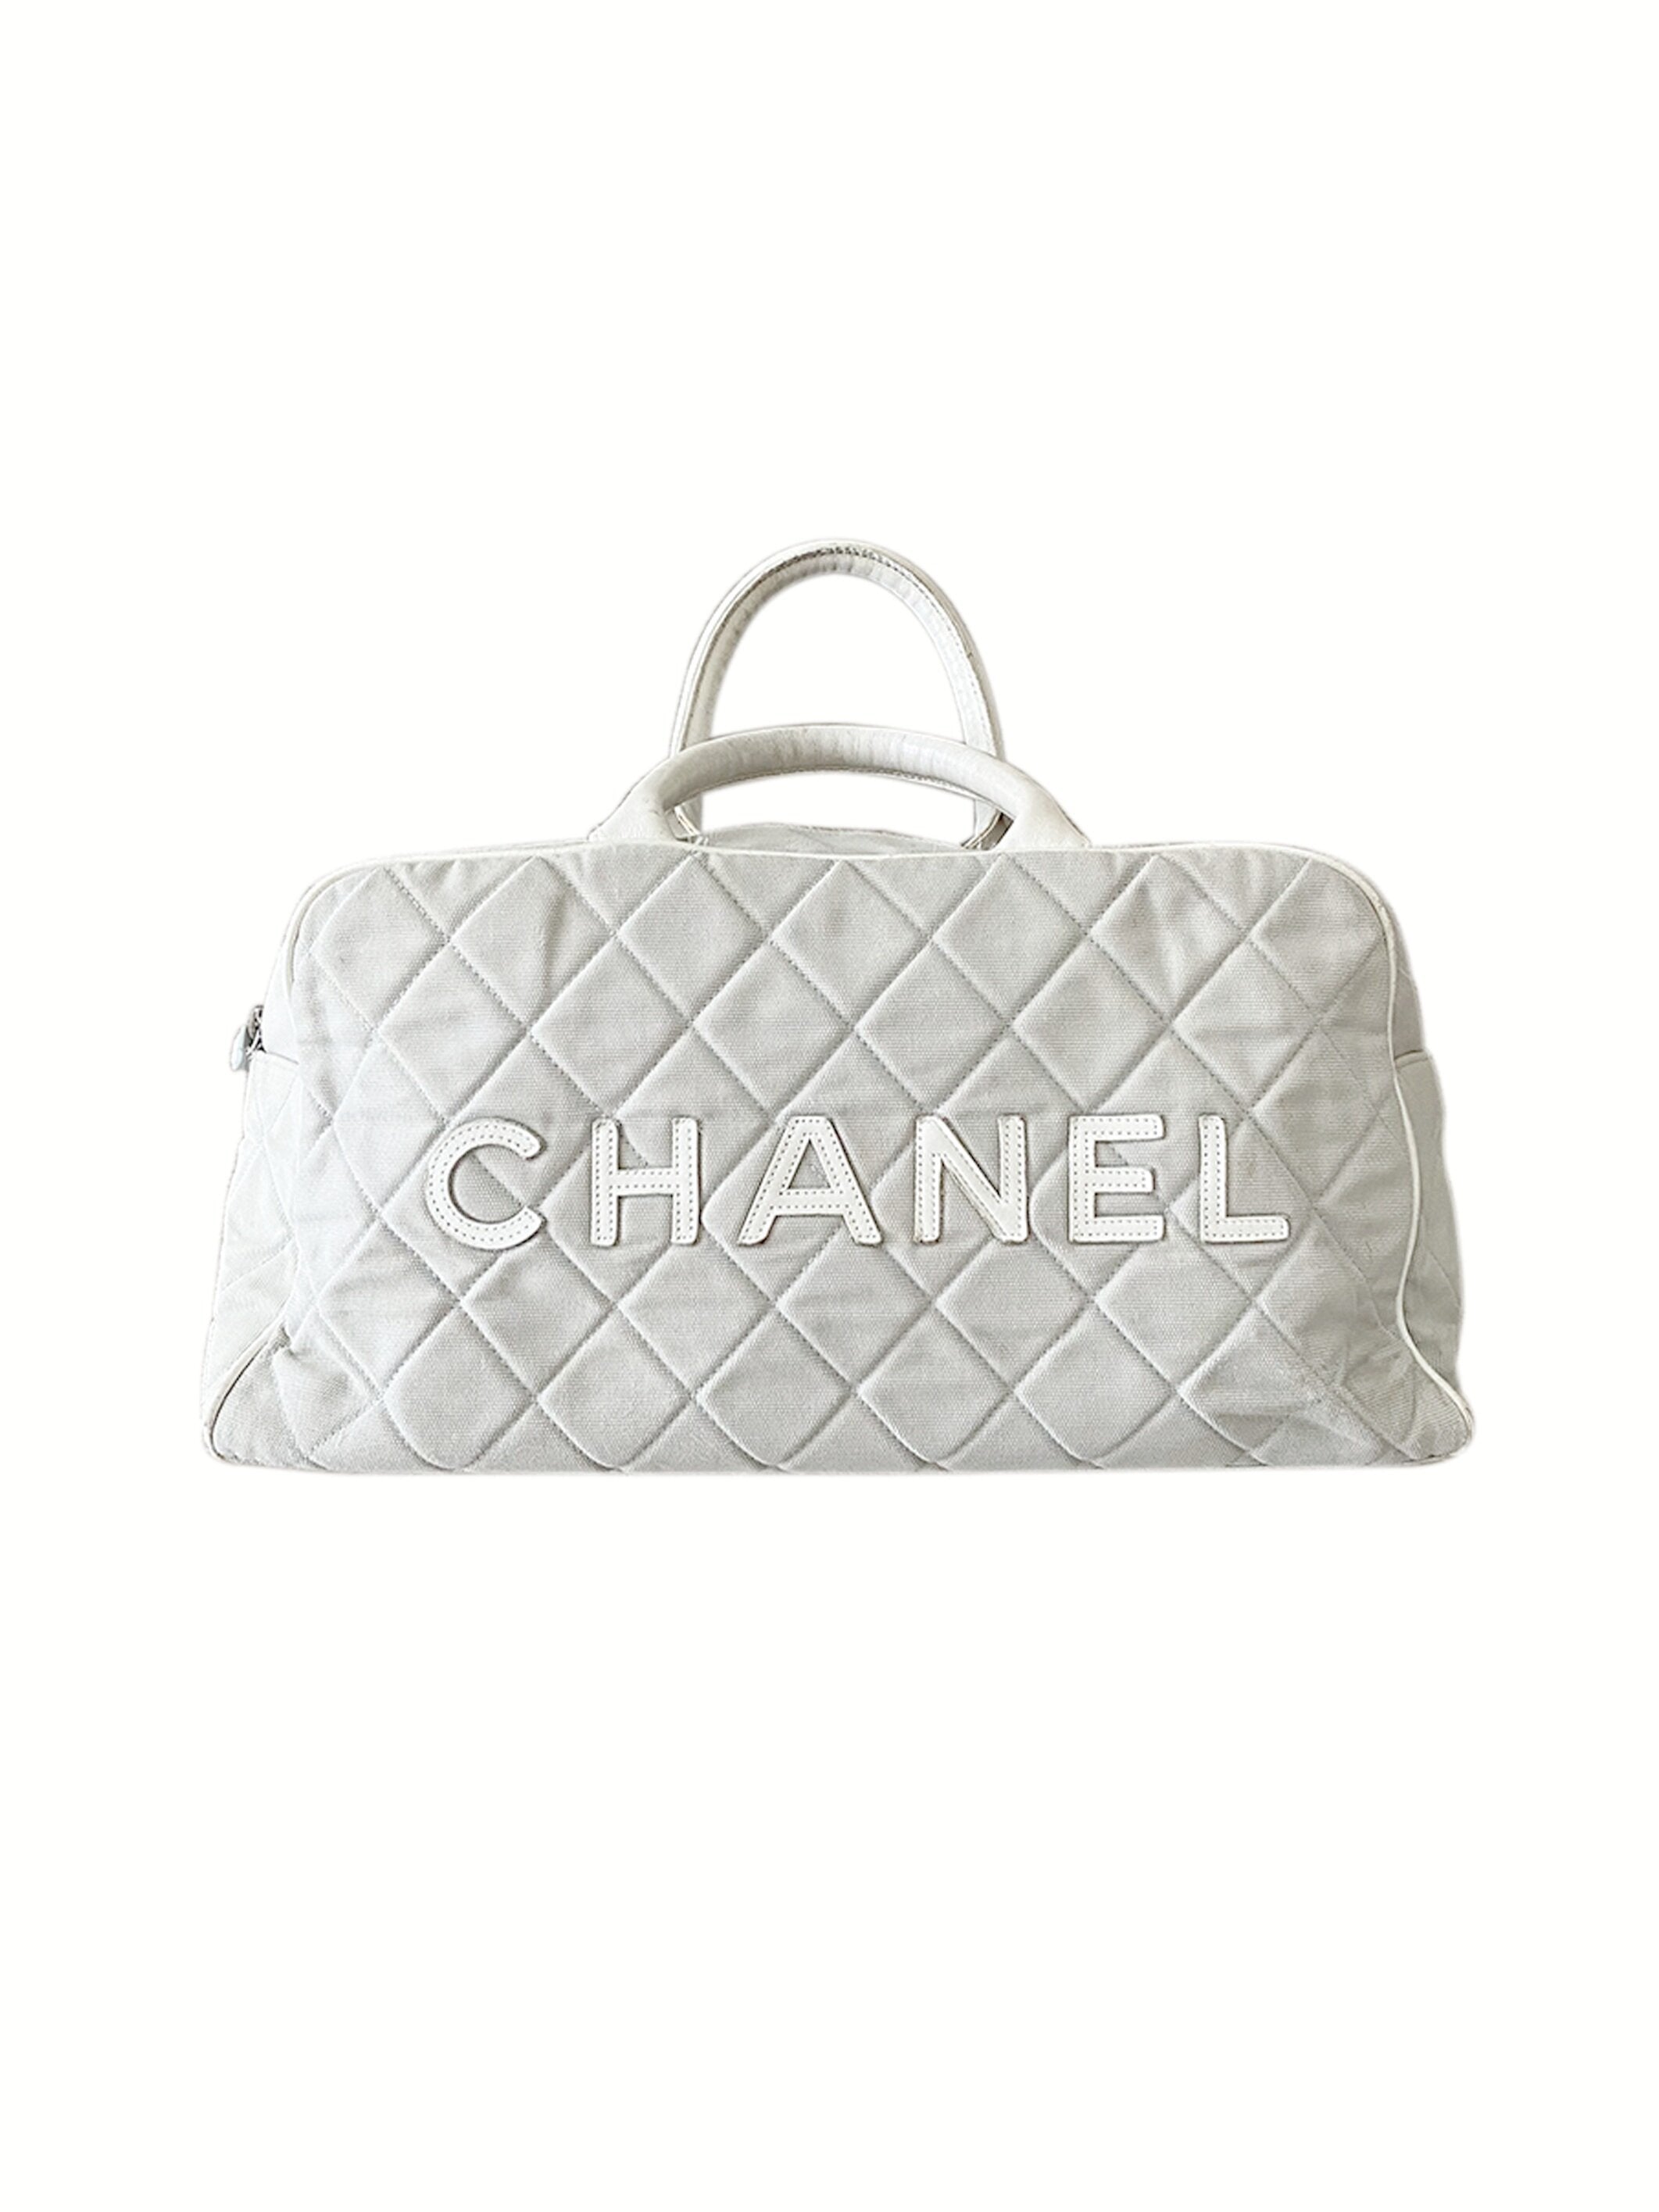 Chanel Quilted Duffle Bag